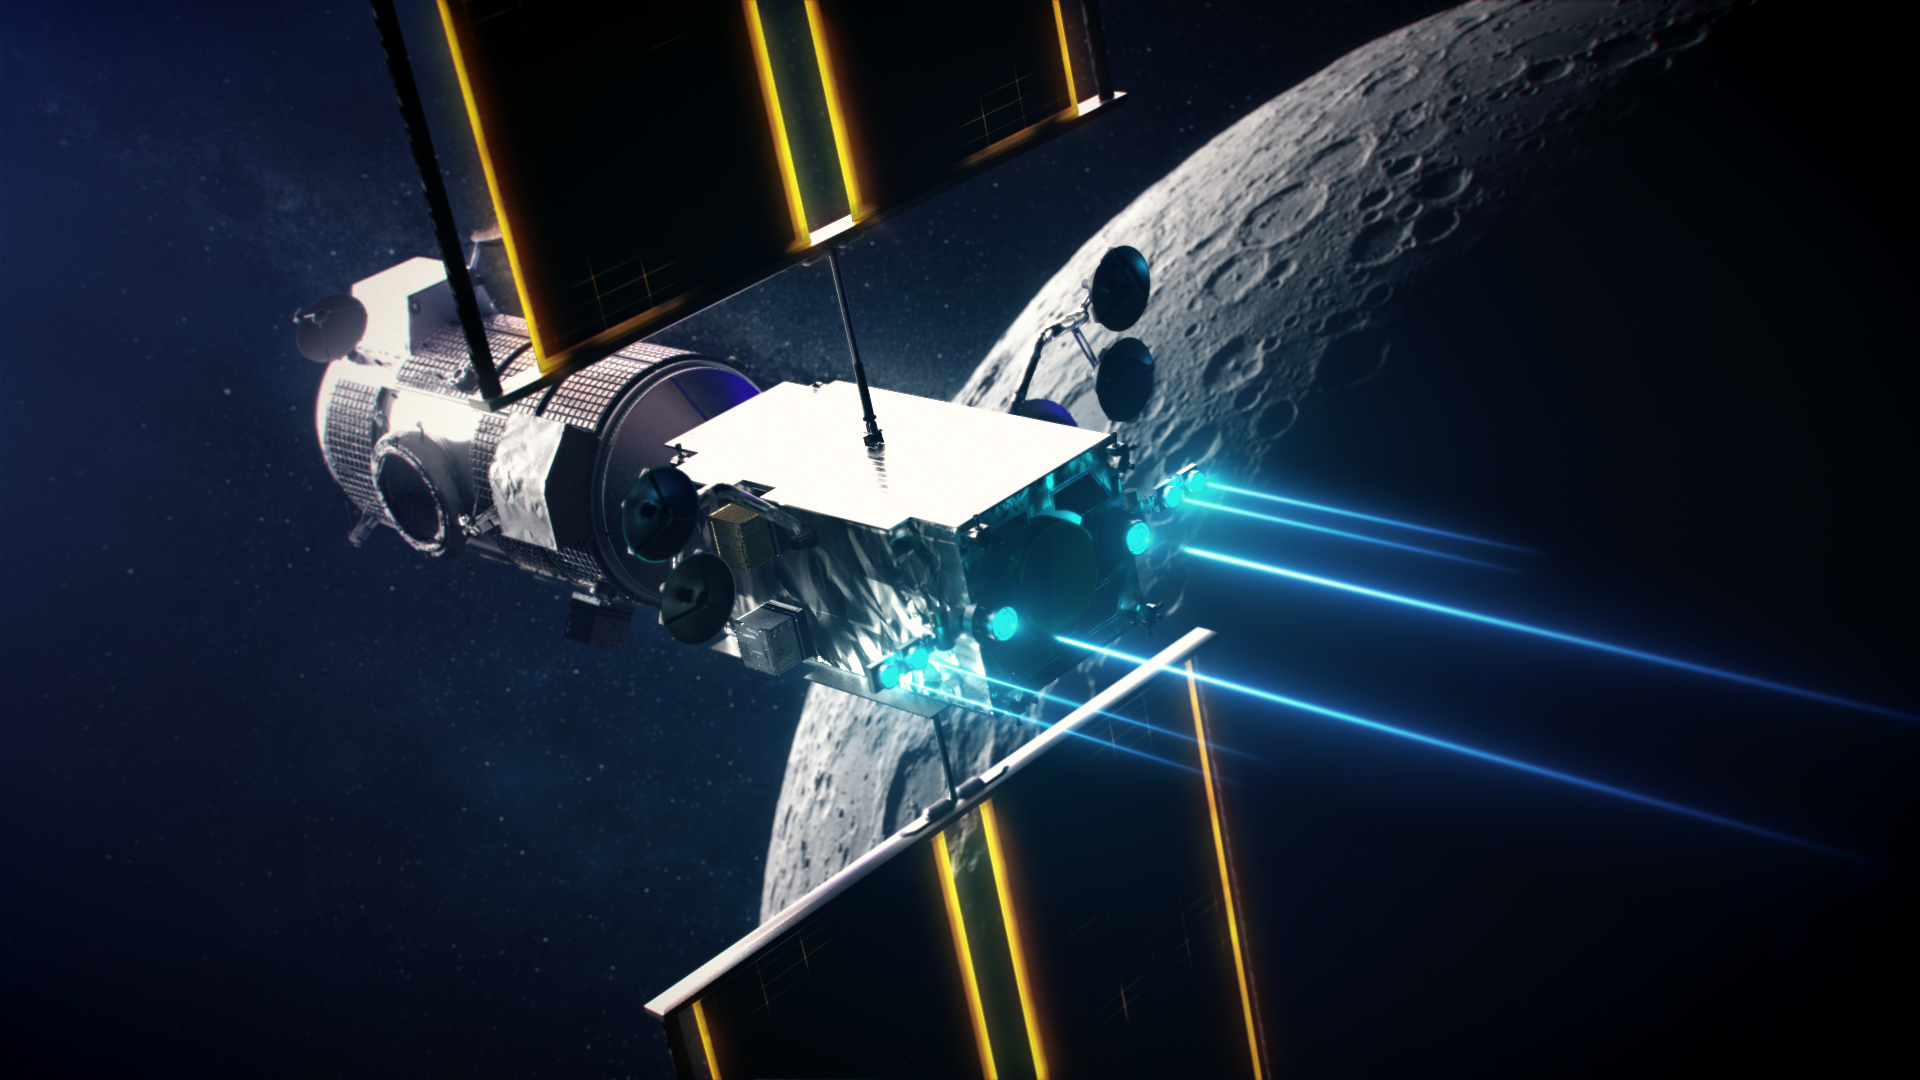 Lunar Gateway: Why the European Refuelling Module is a gamechanger for exploration missions